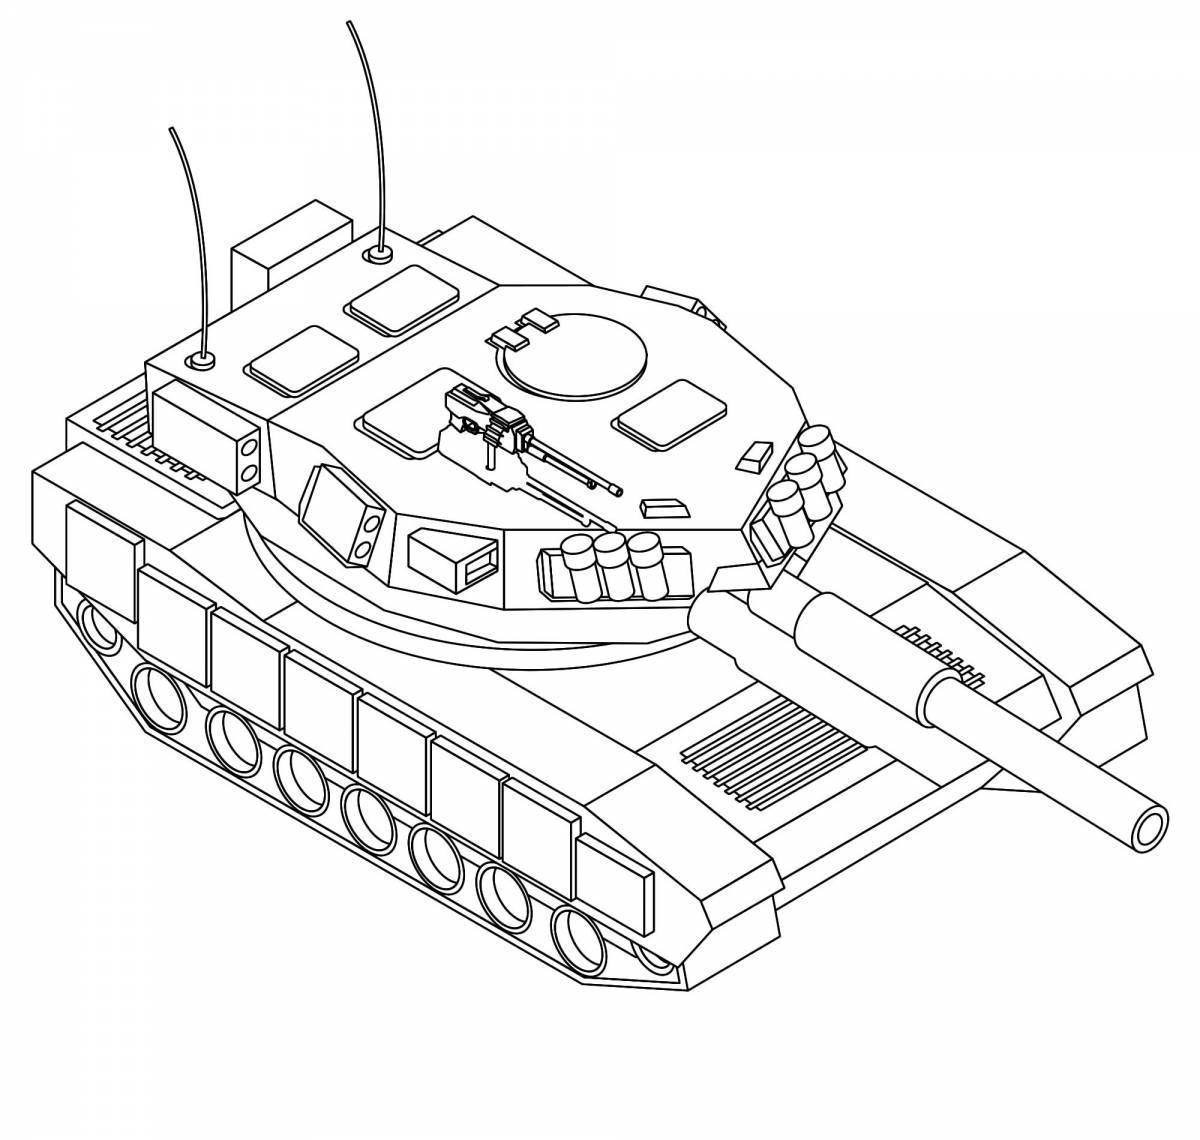 Cute tank by numbers coloring book